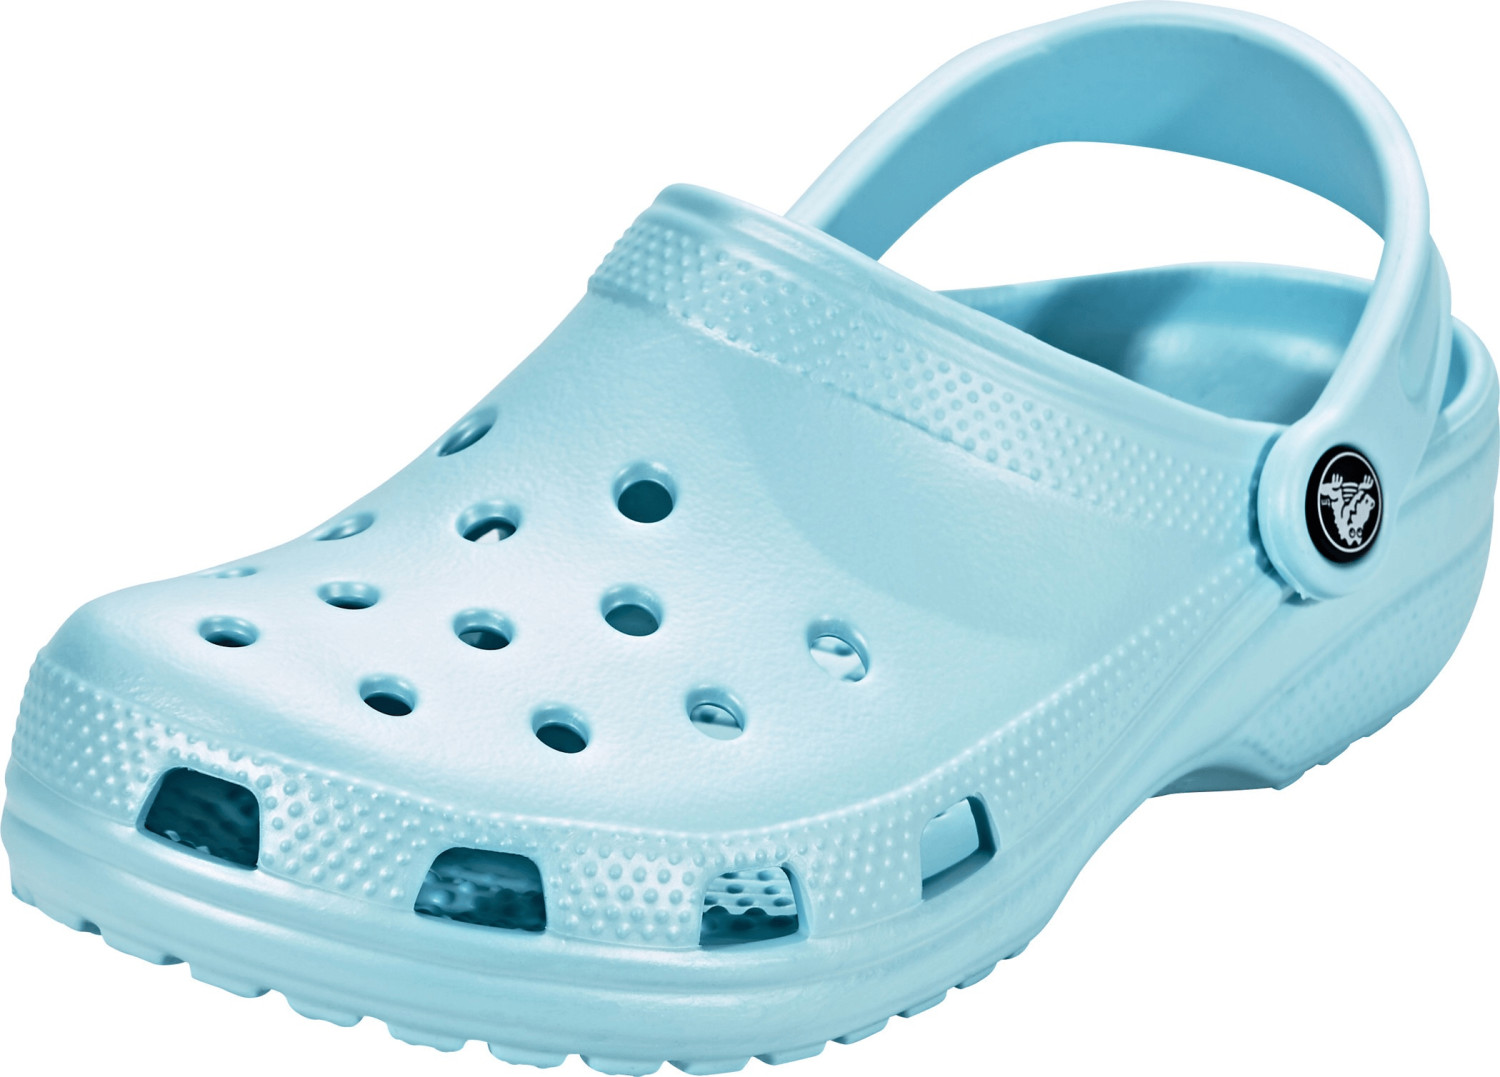 Buy Crocs Classic ice blue from £22.00 (Today) – Best Deals on idealo.co.uk